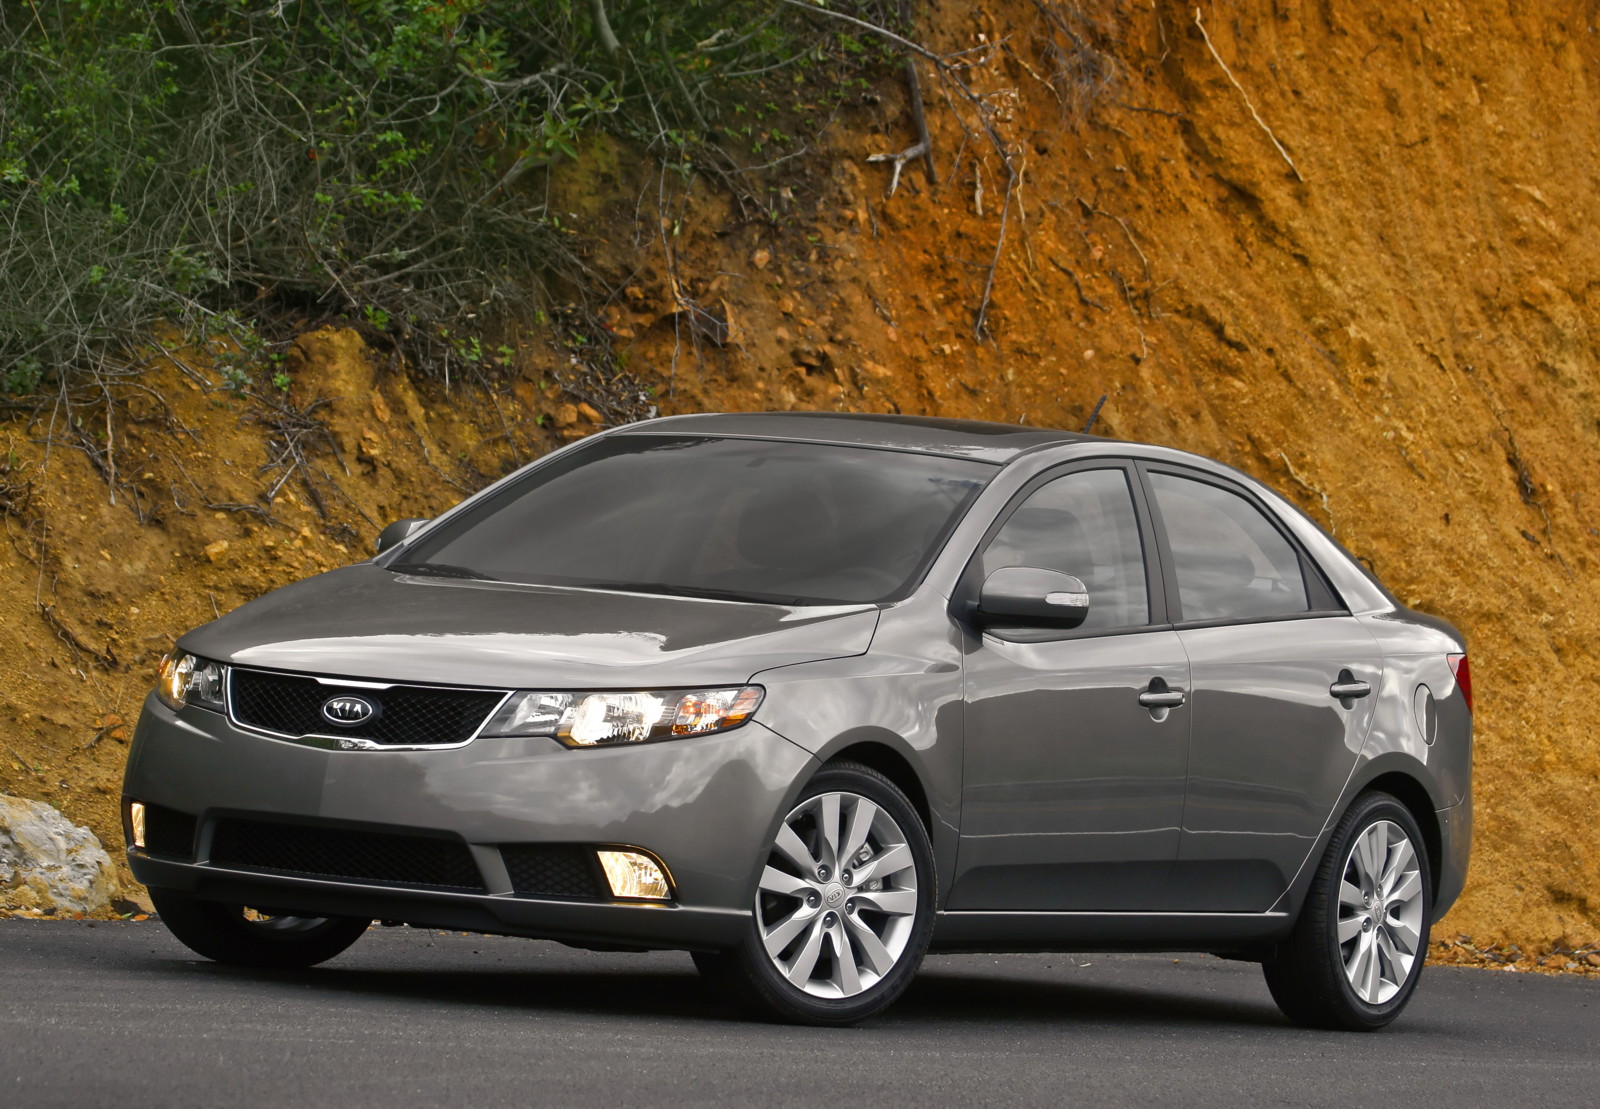 2010 Kia Forte Review, Ratings, Specs, Prices, and Photos - The Car